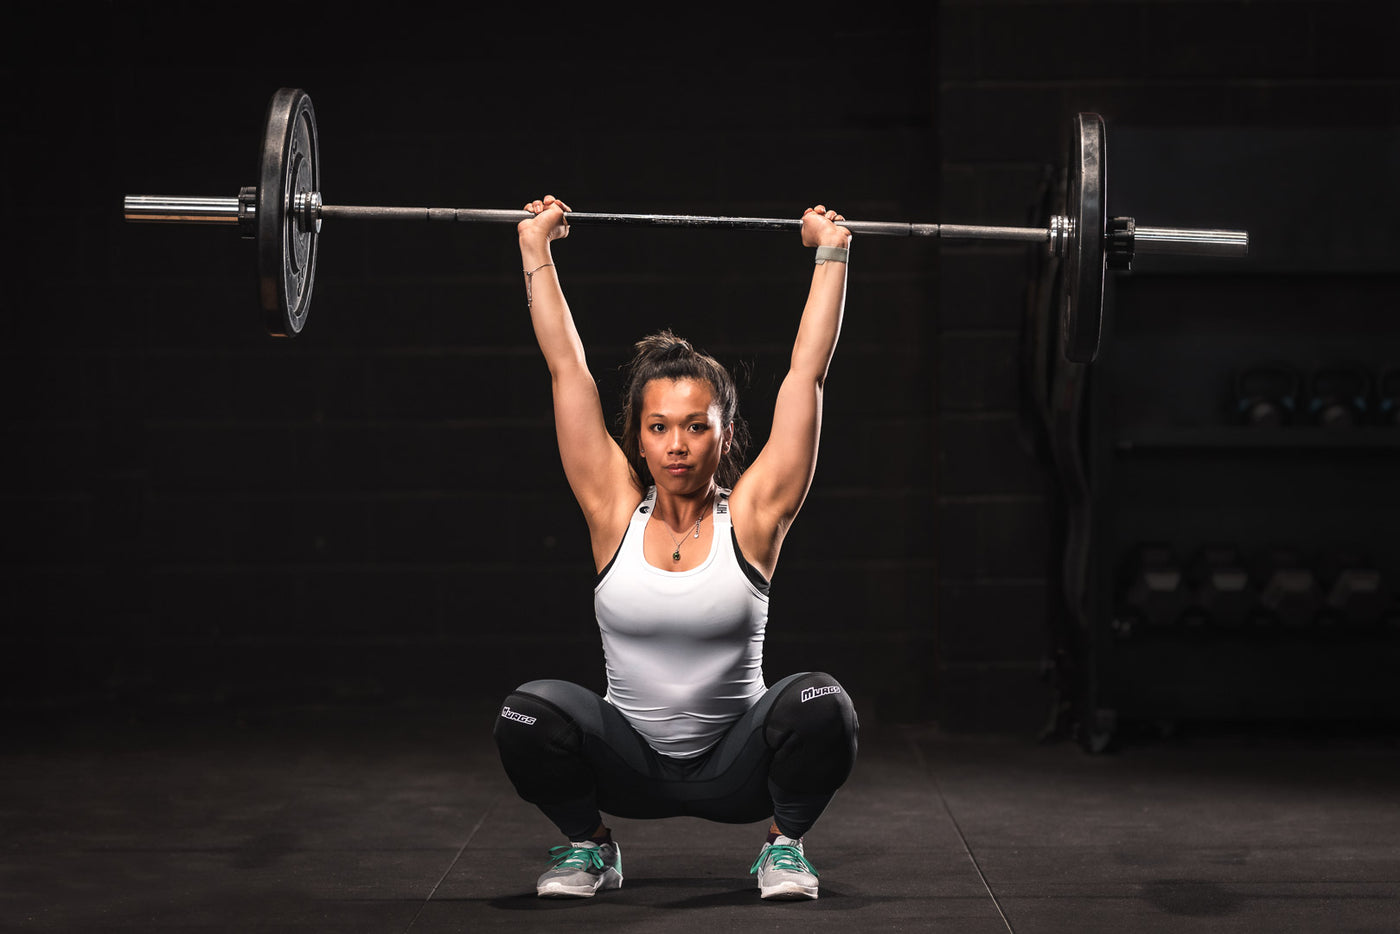 Illustrate a gym scene showcasing five techniques that can enhance CrossFit performance. 1) A Hispanic woman demonstrating the correct form of a kettlebell swing. 2) A Caucasian man showing optimal bo